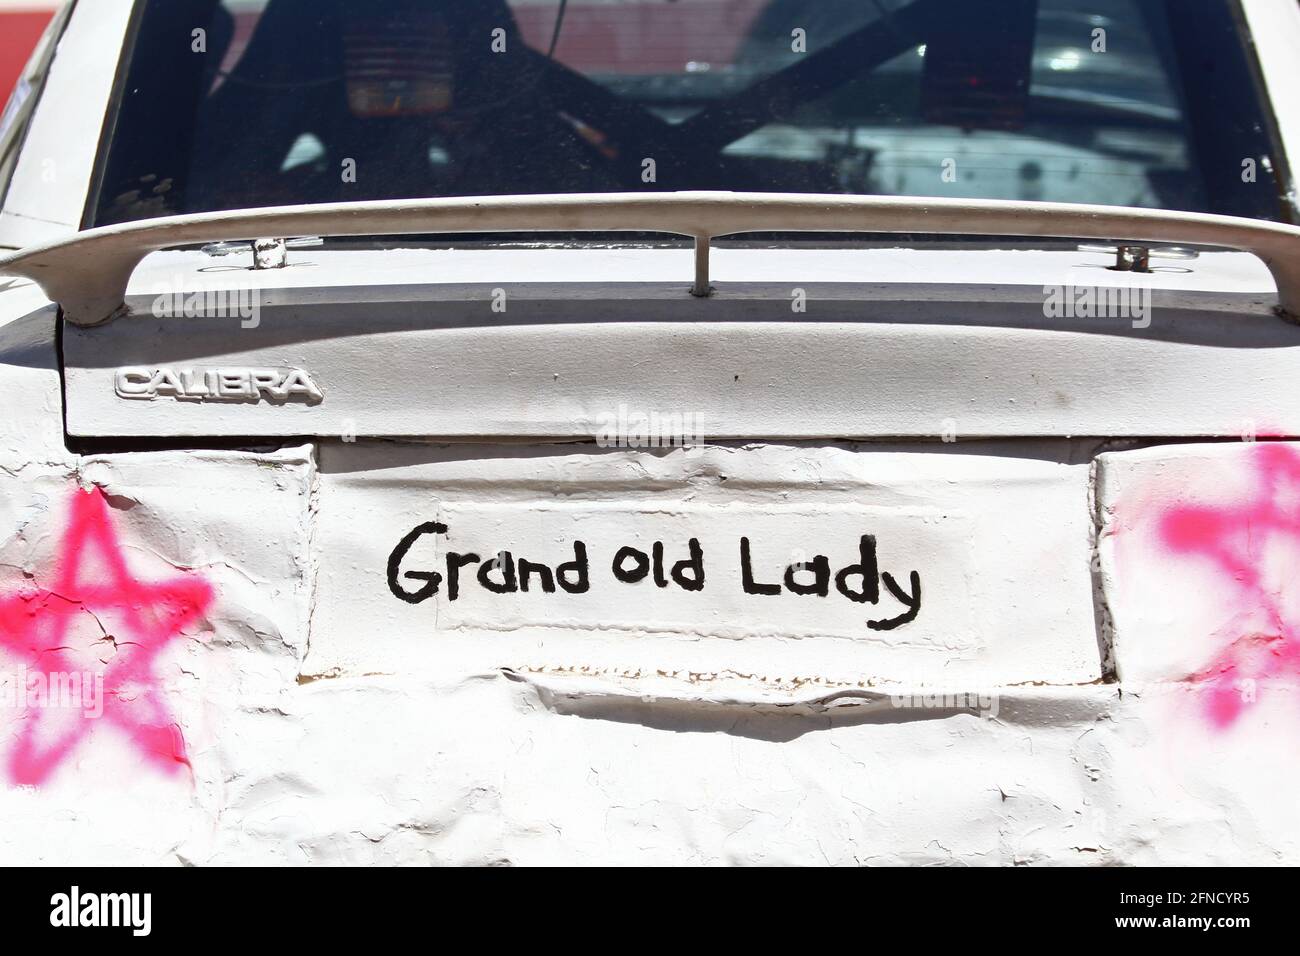 Folk racing car with the text Grand old lady on. Stock Photo